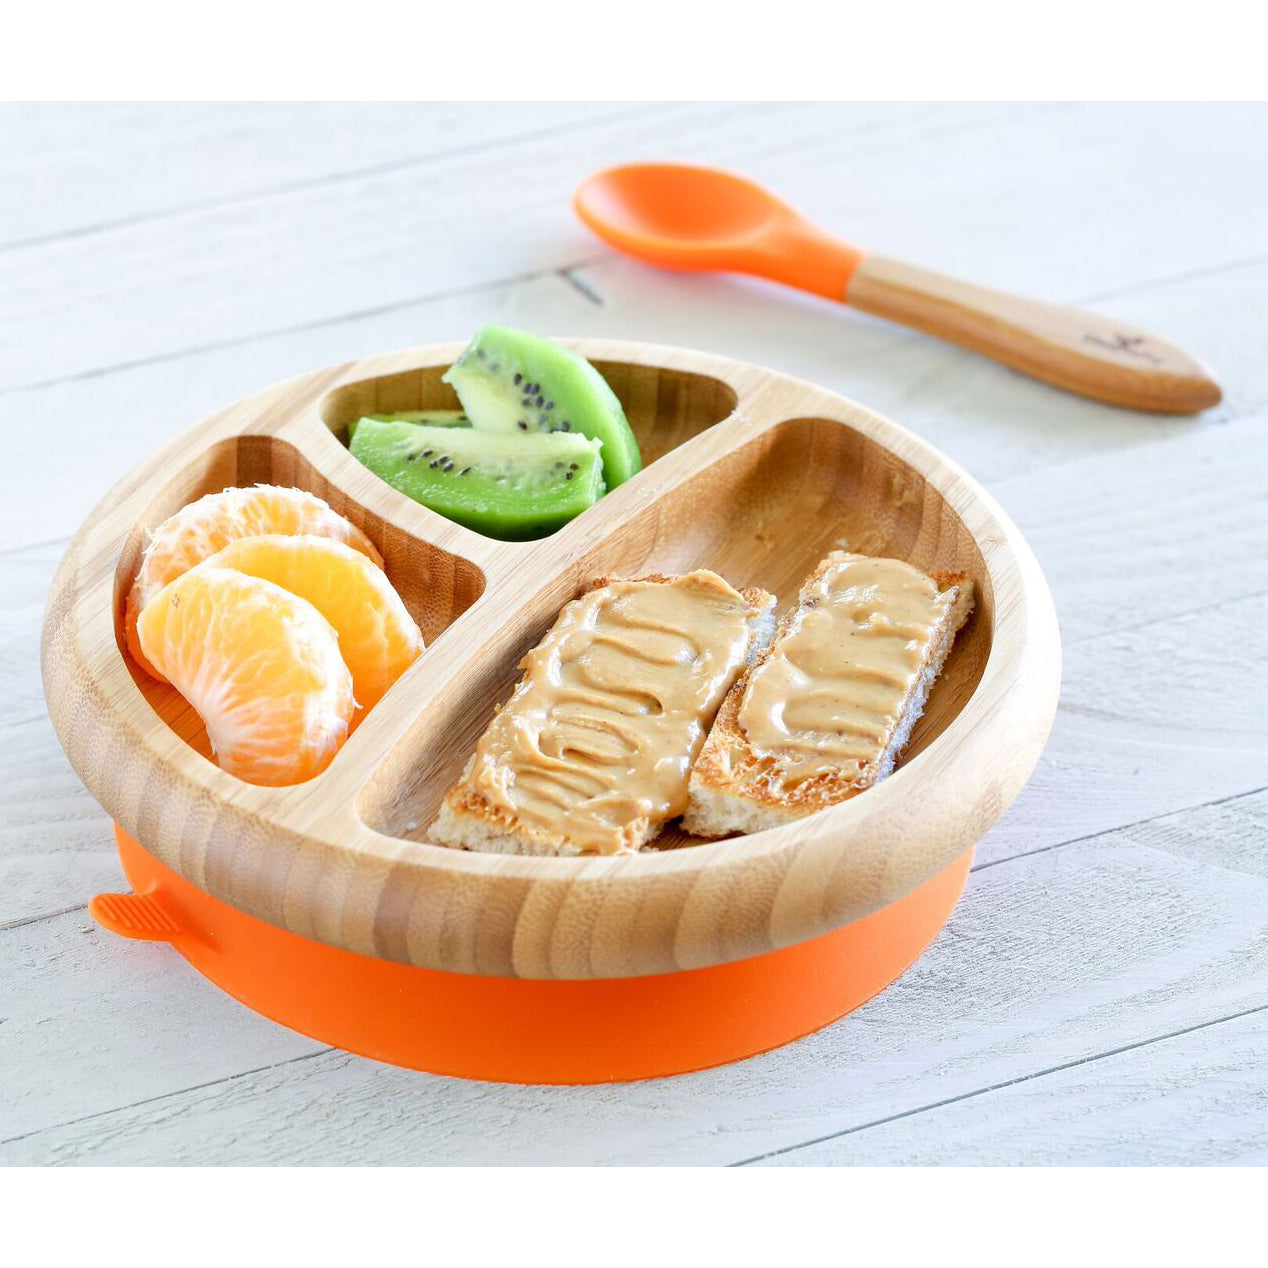 Avanchy - Bamboo Suction Classic Plate + Spoon OG